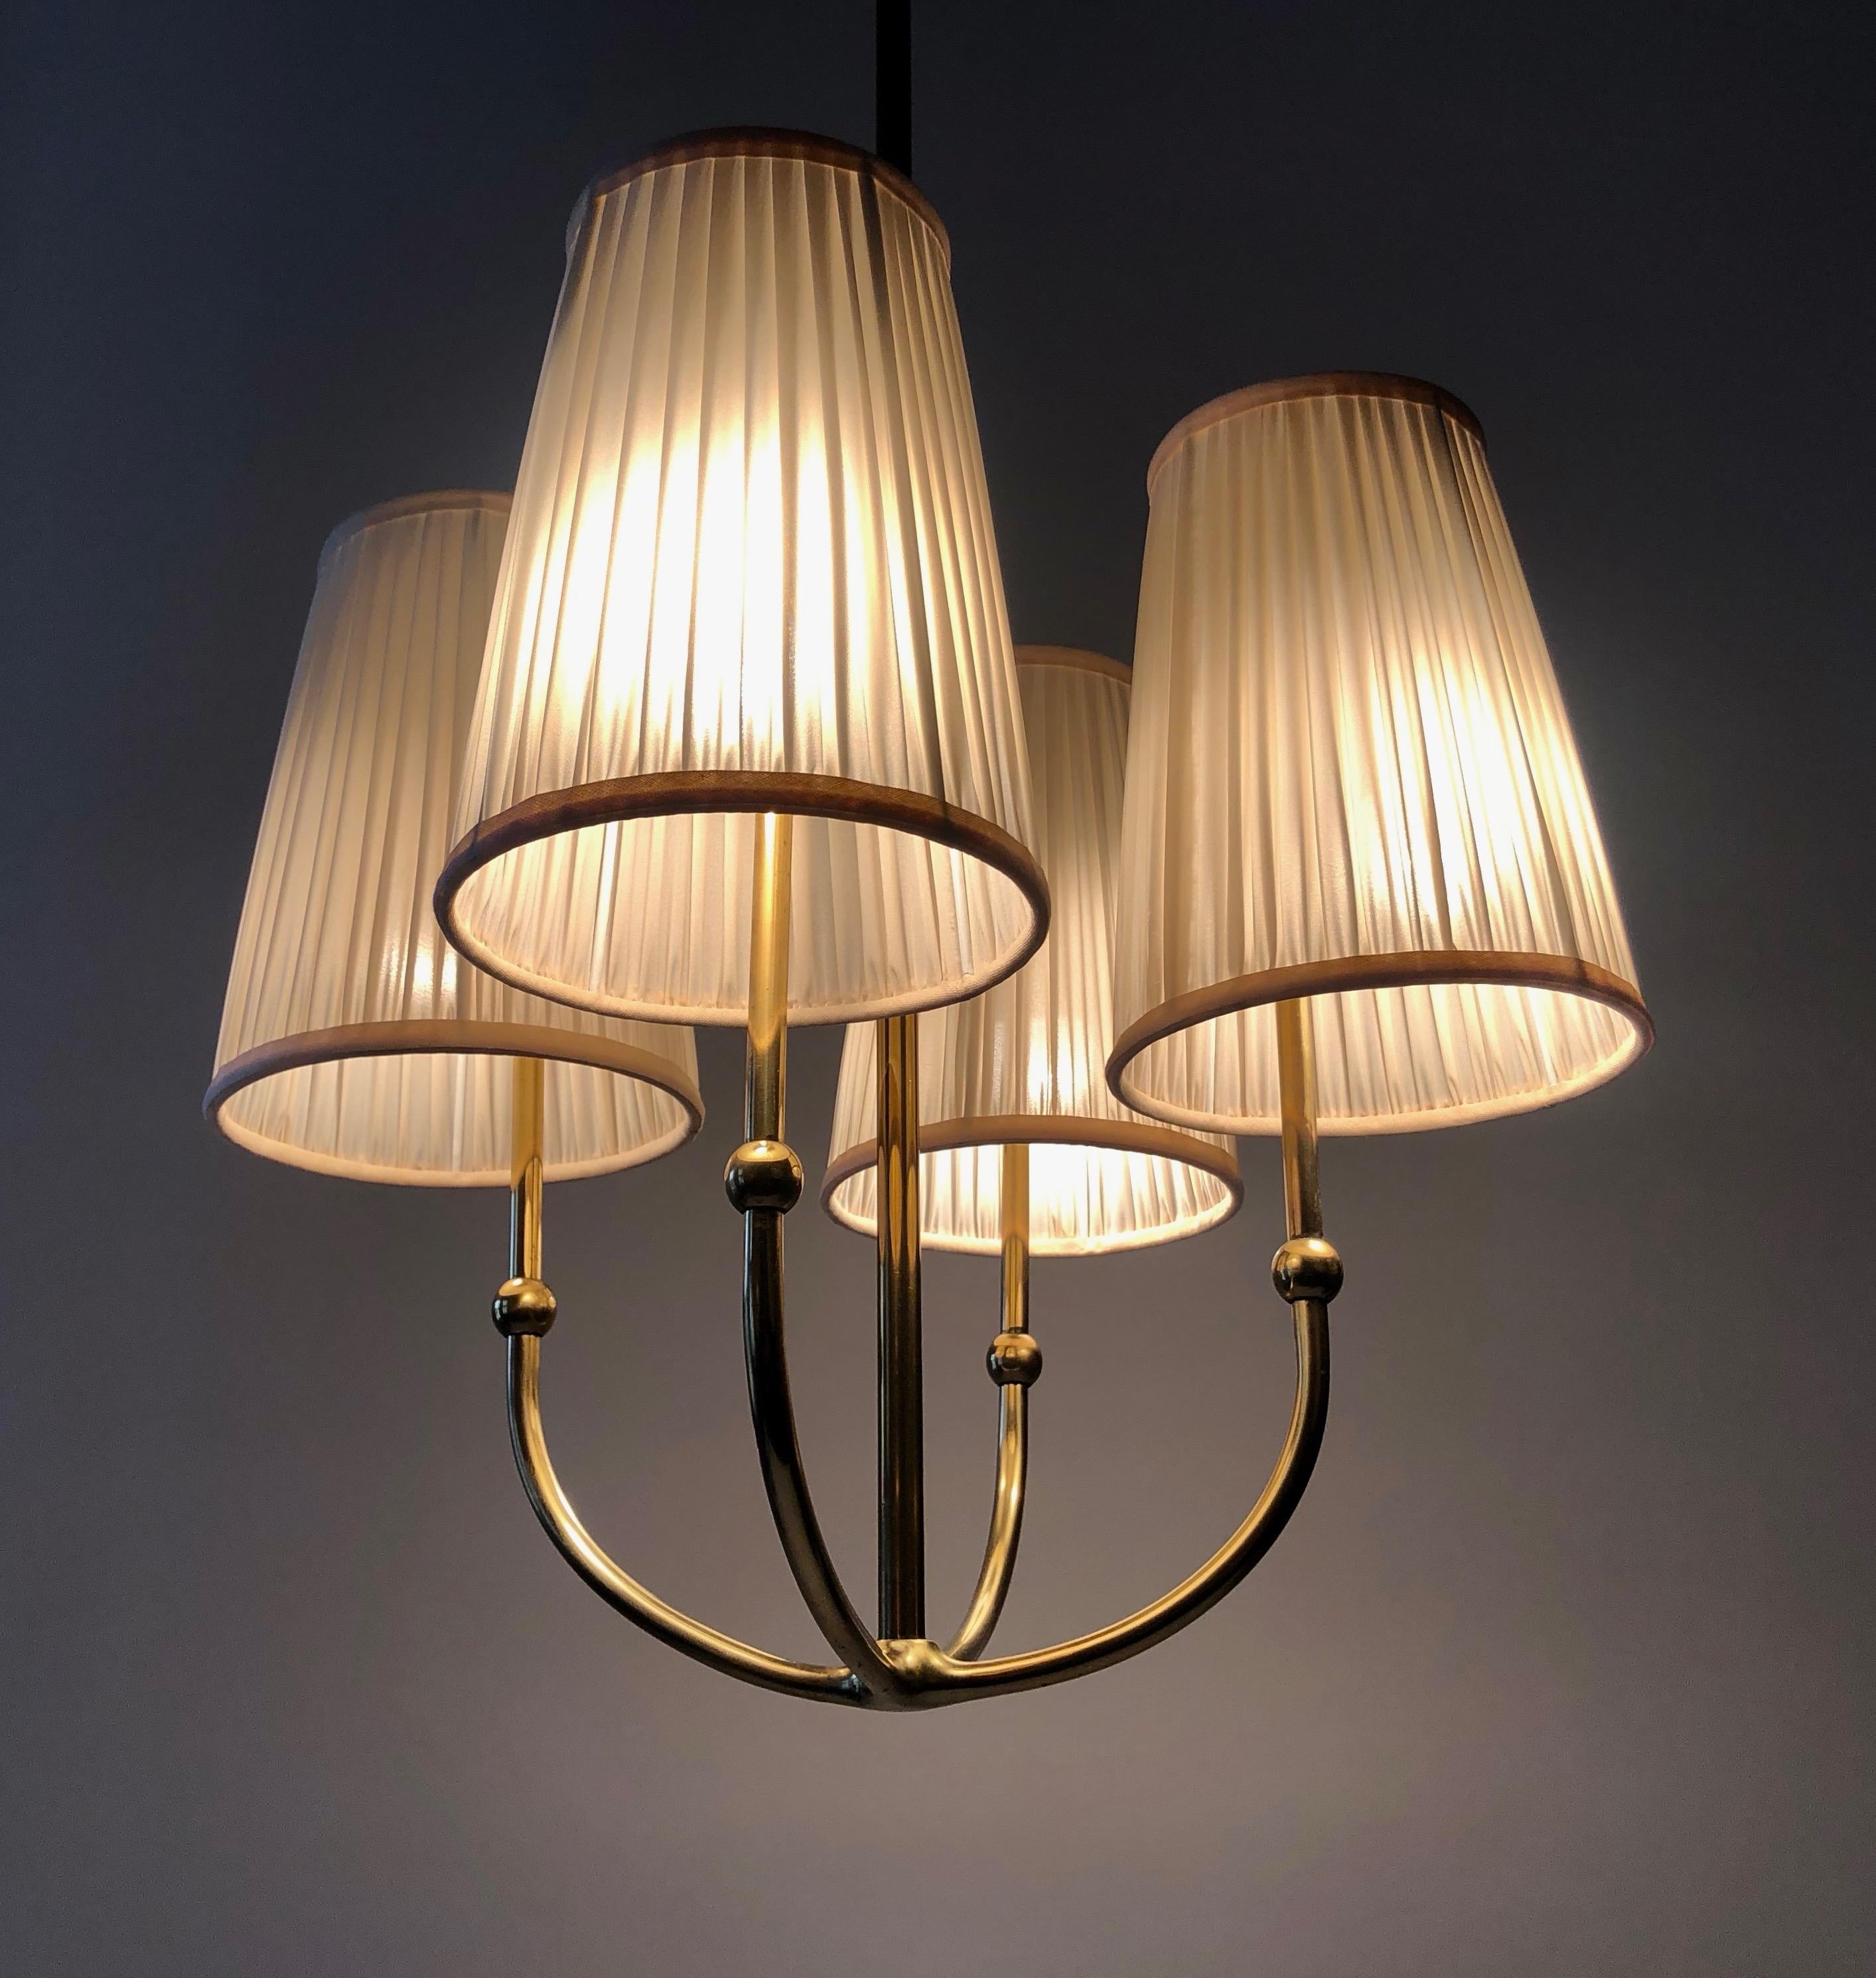 Four Arm Chandelier in Brass with Silk Shades , 1930's, Austria For Sale 2